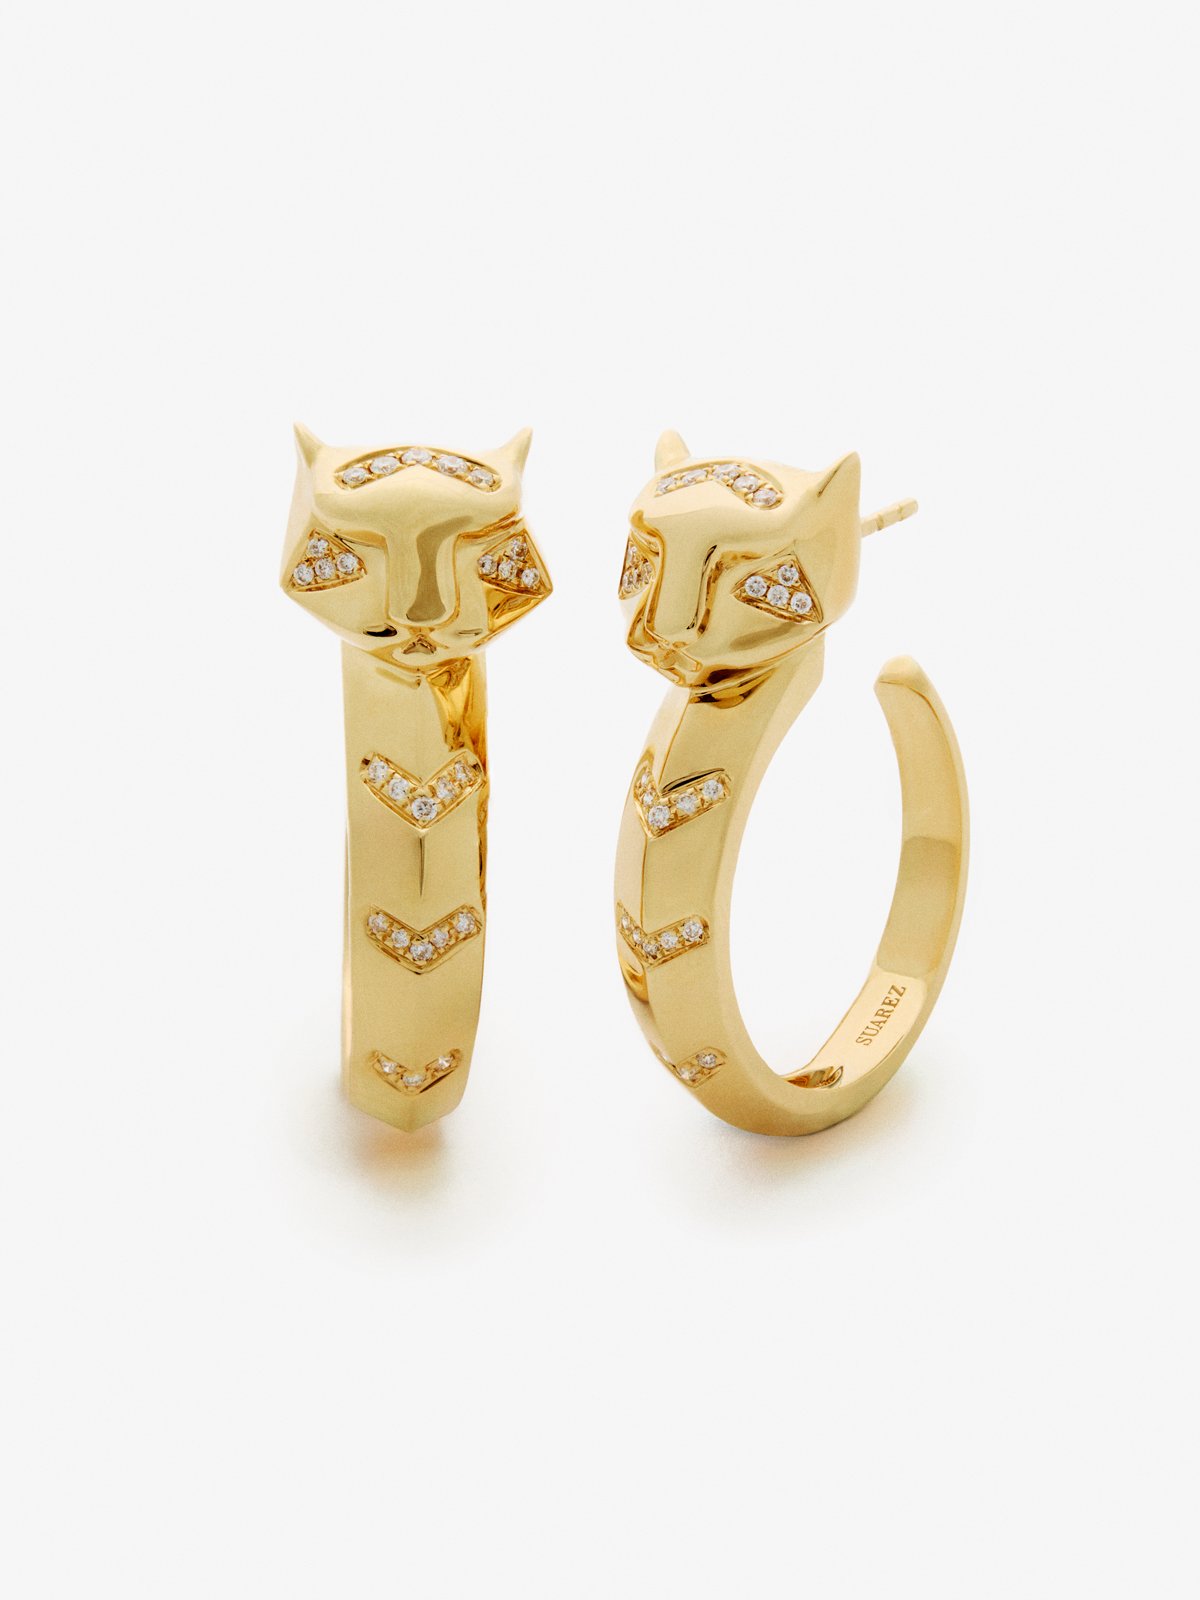 18K yellow gold hoop earrings with 52 brilliant-cut diamonds with a total of 0.16 cts and a tiger shape